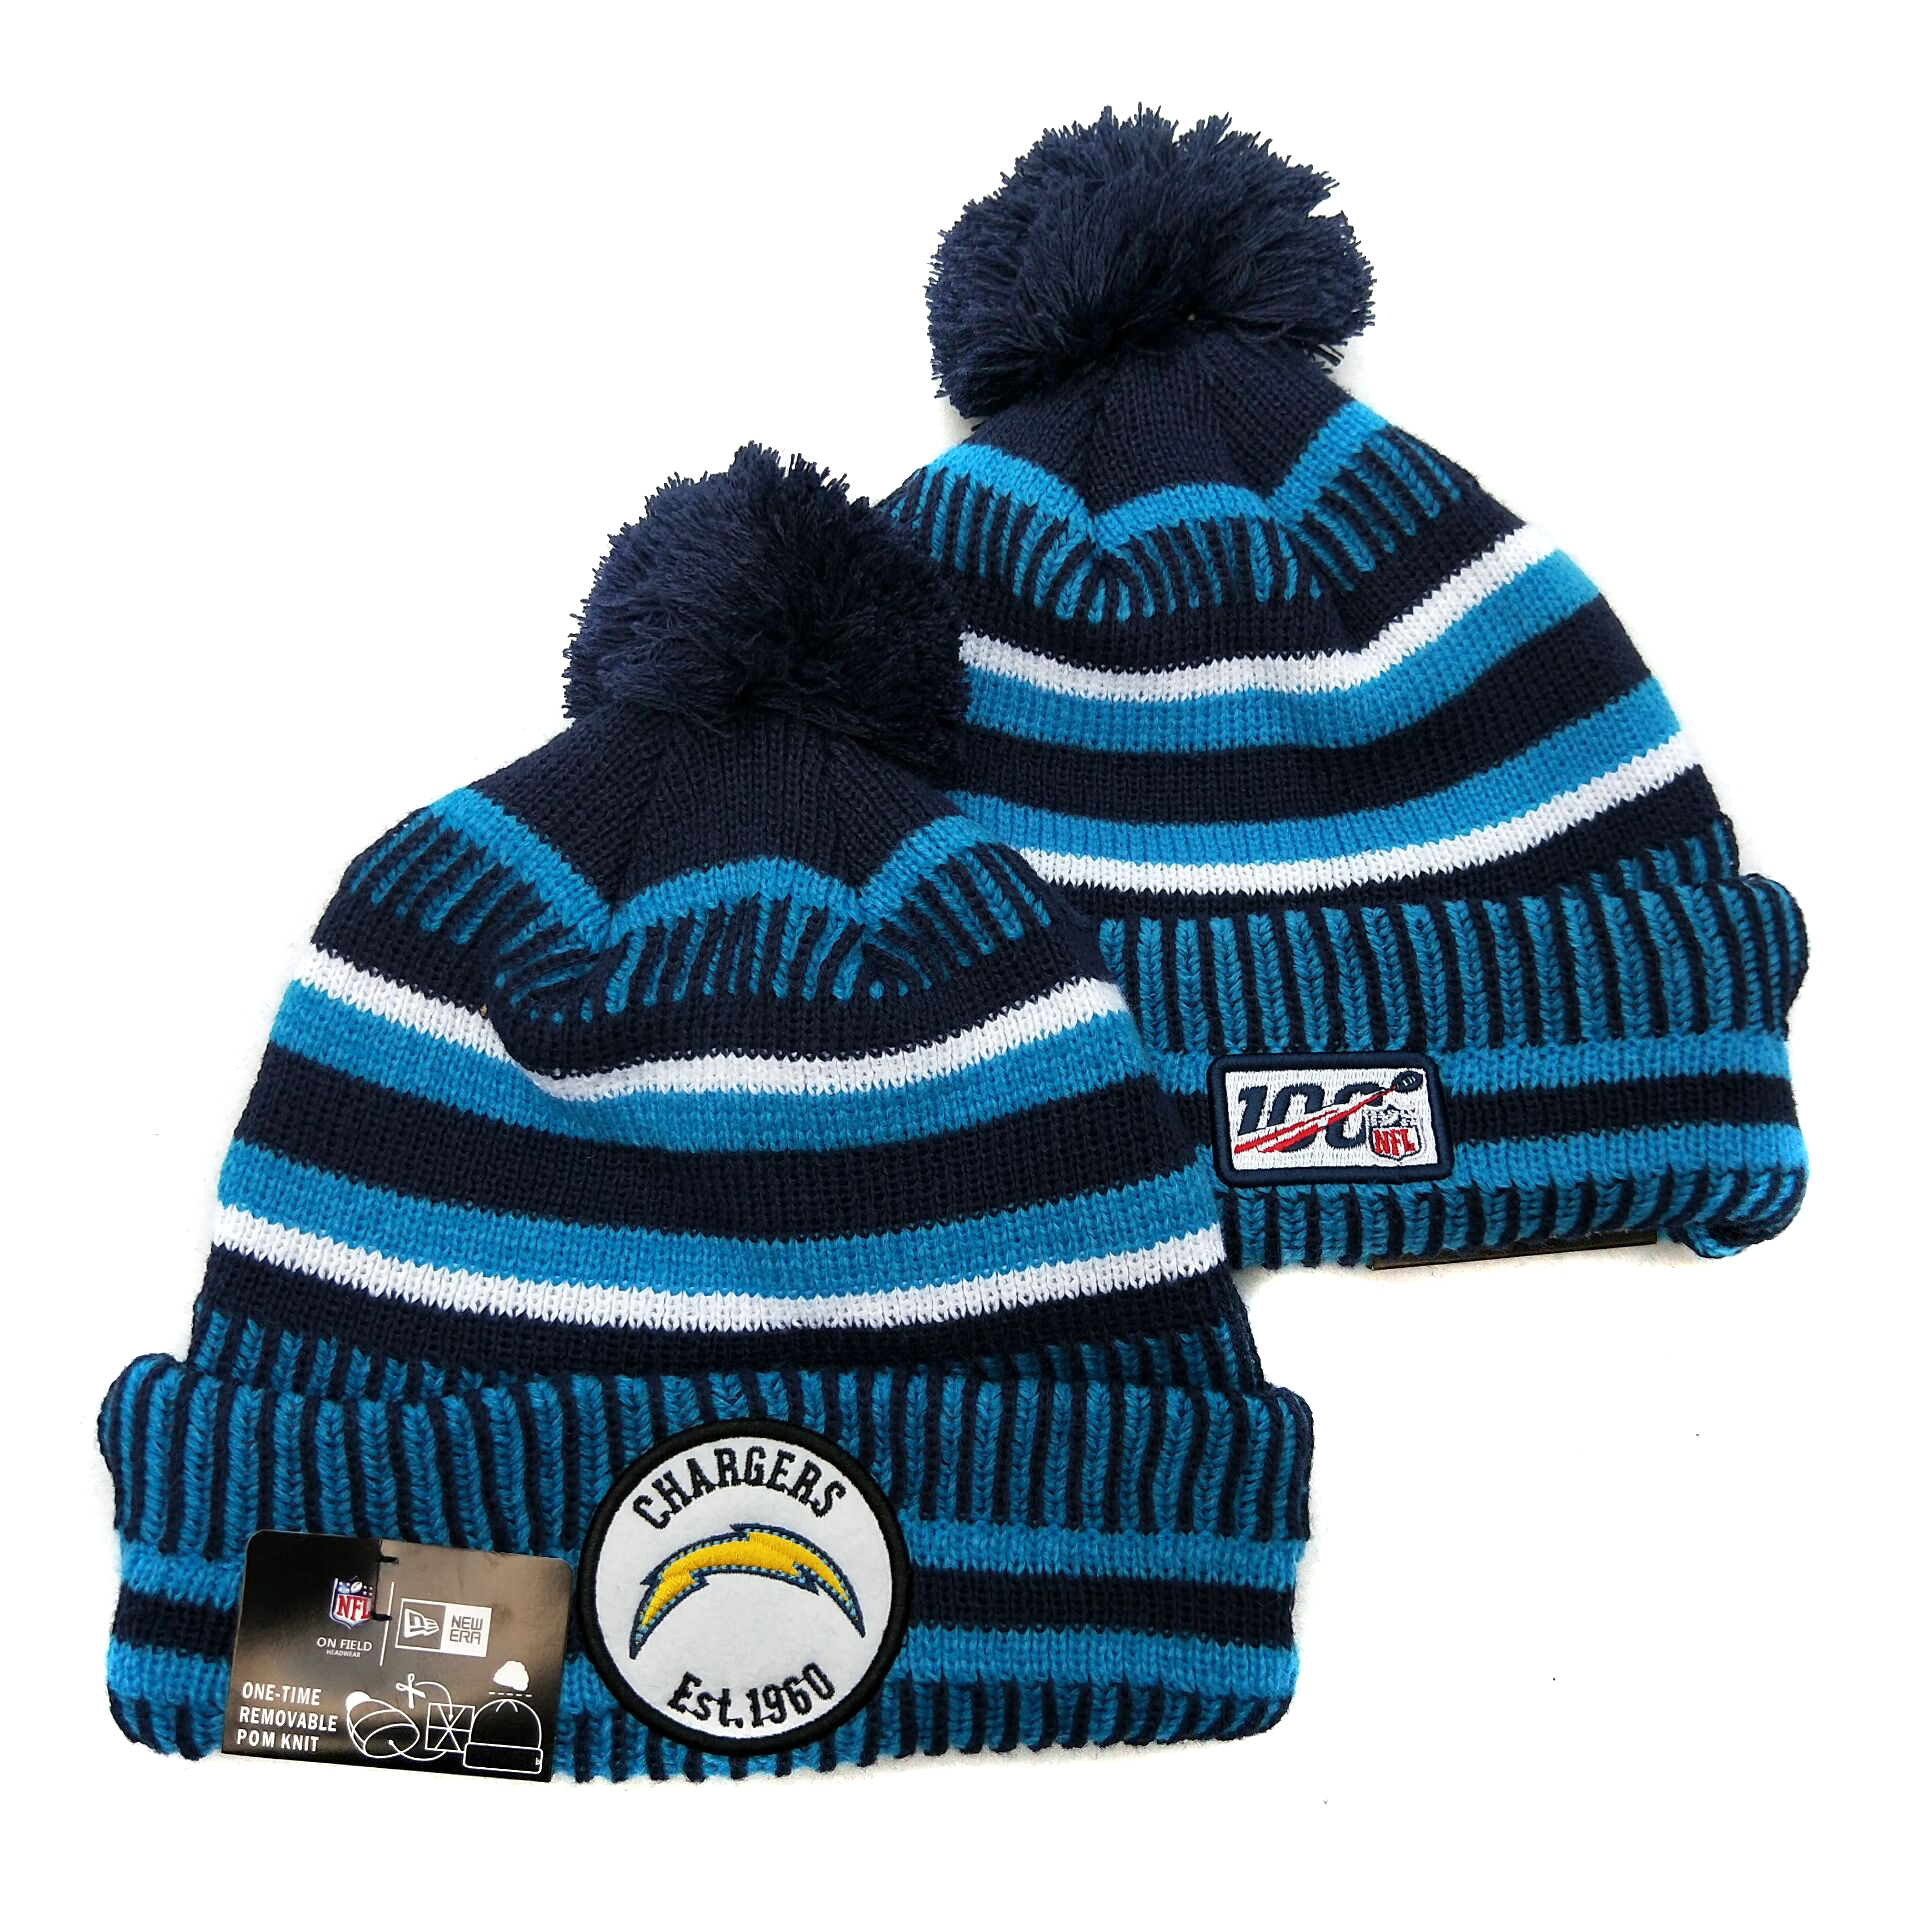 Los Angeles Chargers Knit Hats 029